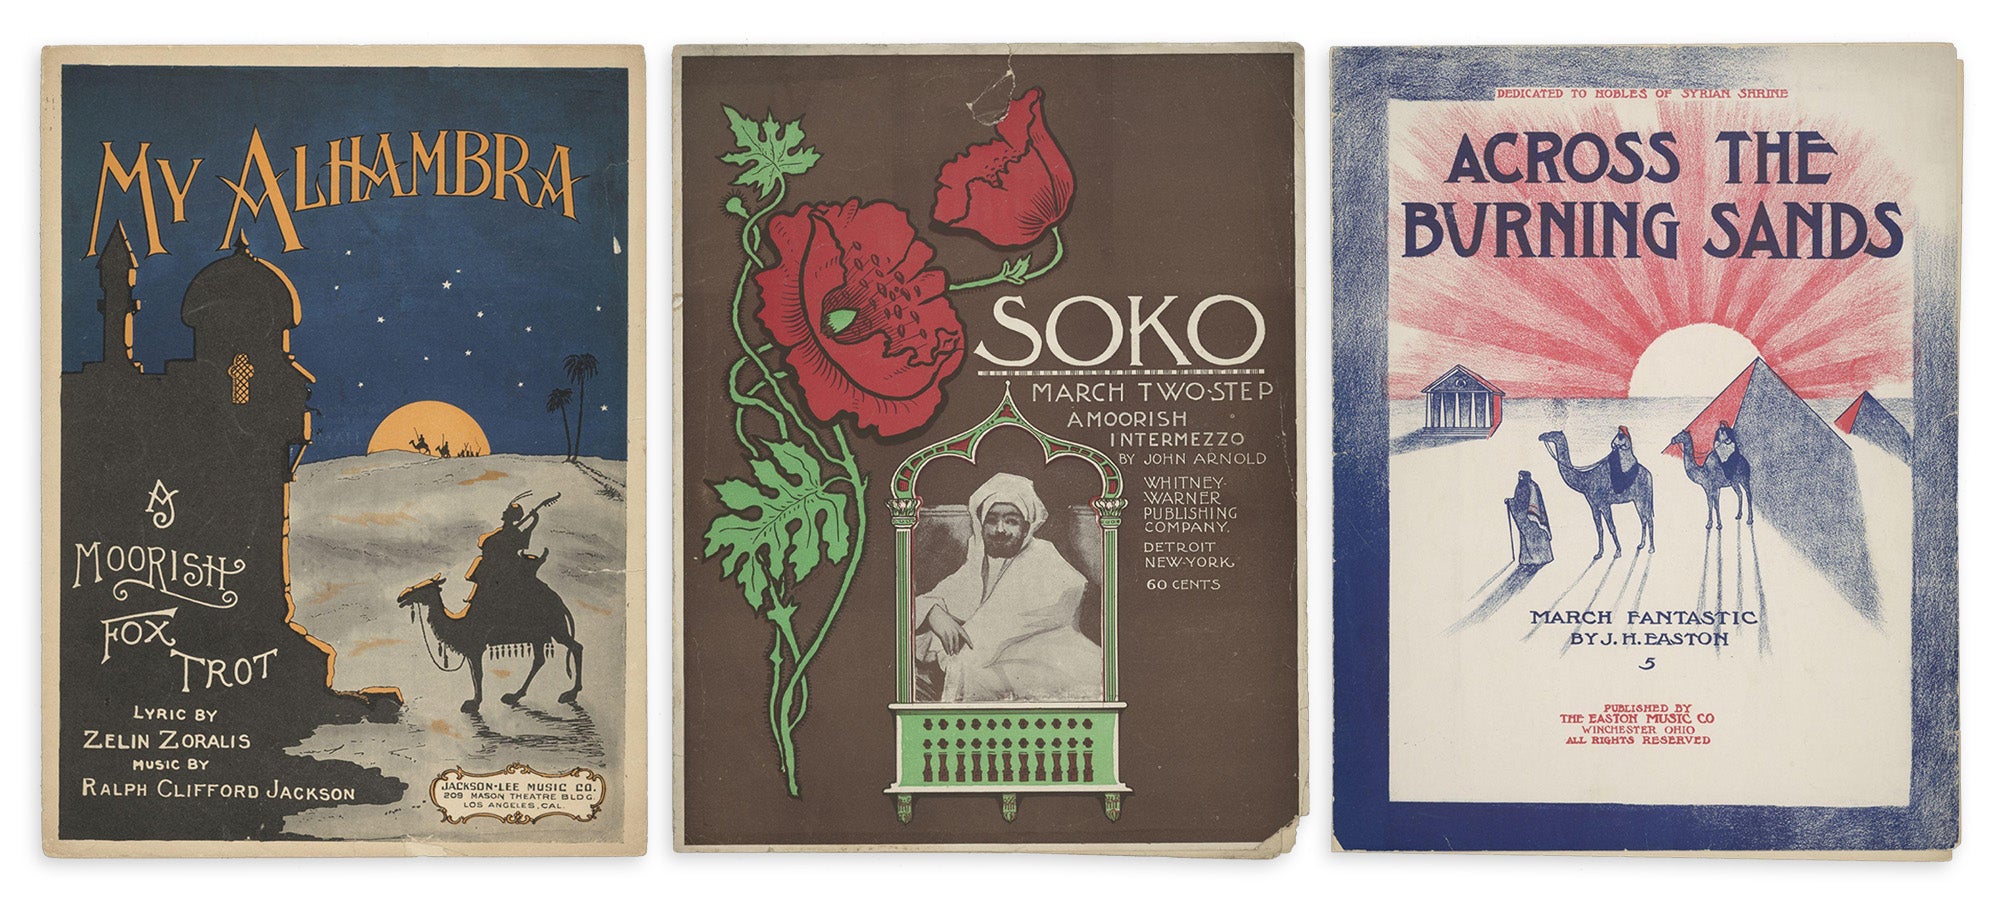 A collage of cover images from Johns Hopkins’ Collection of Middle East-inspired Sheet Music